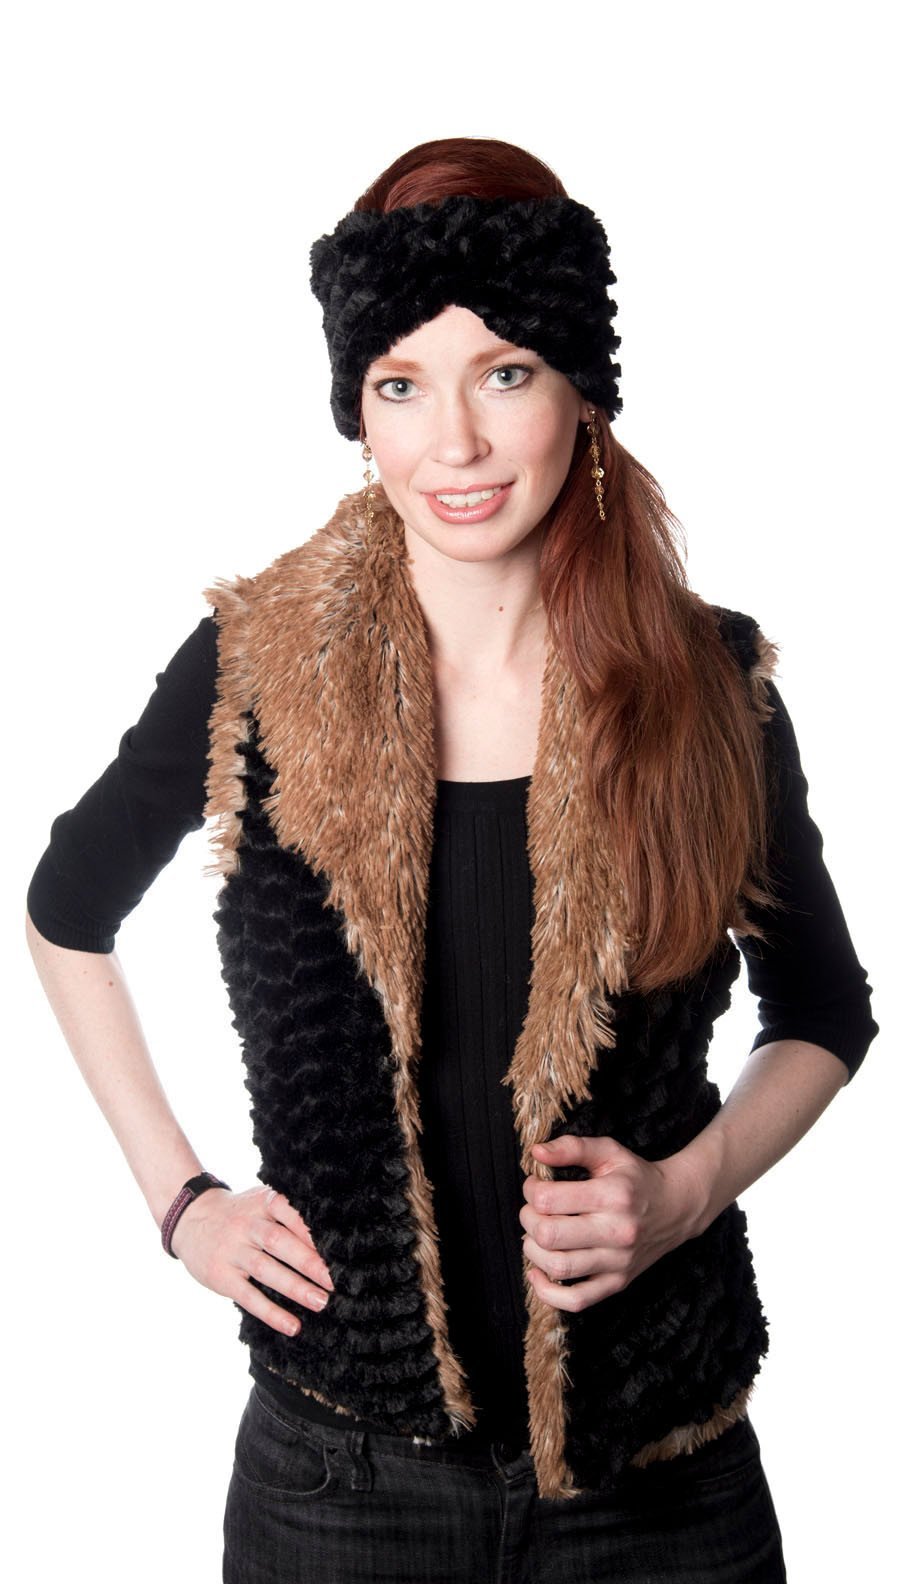 Modeling posing in Shawl Collar Vest | Desert Sand in Midnight Faux Fur with Red Fox Long Hair Faux Fur | Handmade by Pandemonium Millinery | Seattle WA USA